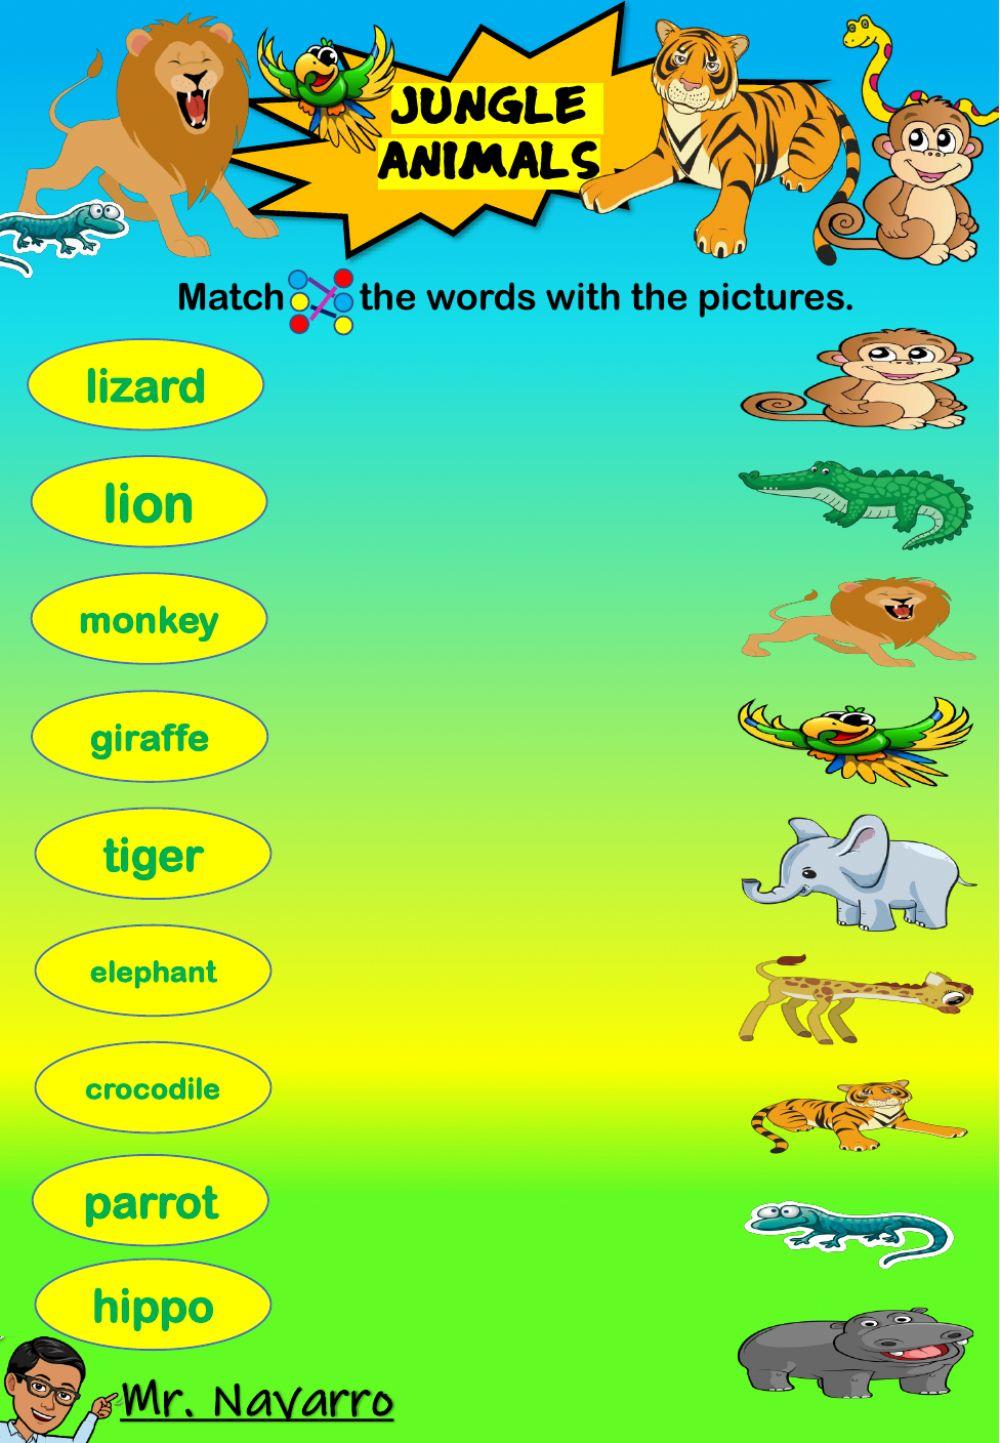 Jungle Animals (Match the words with the pictures)